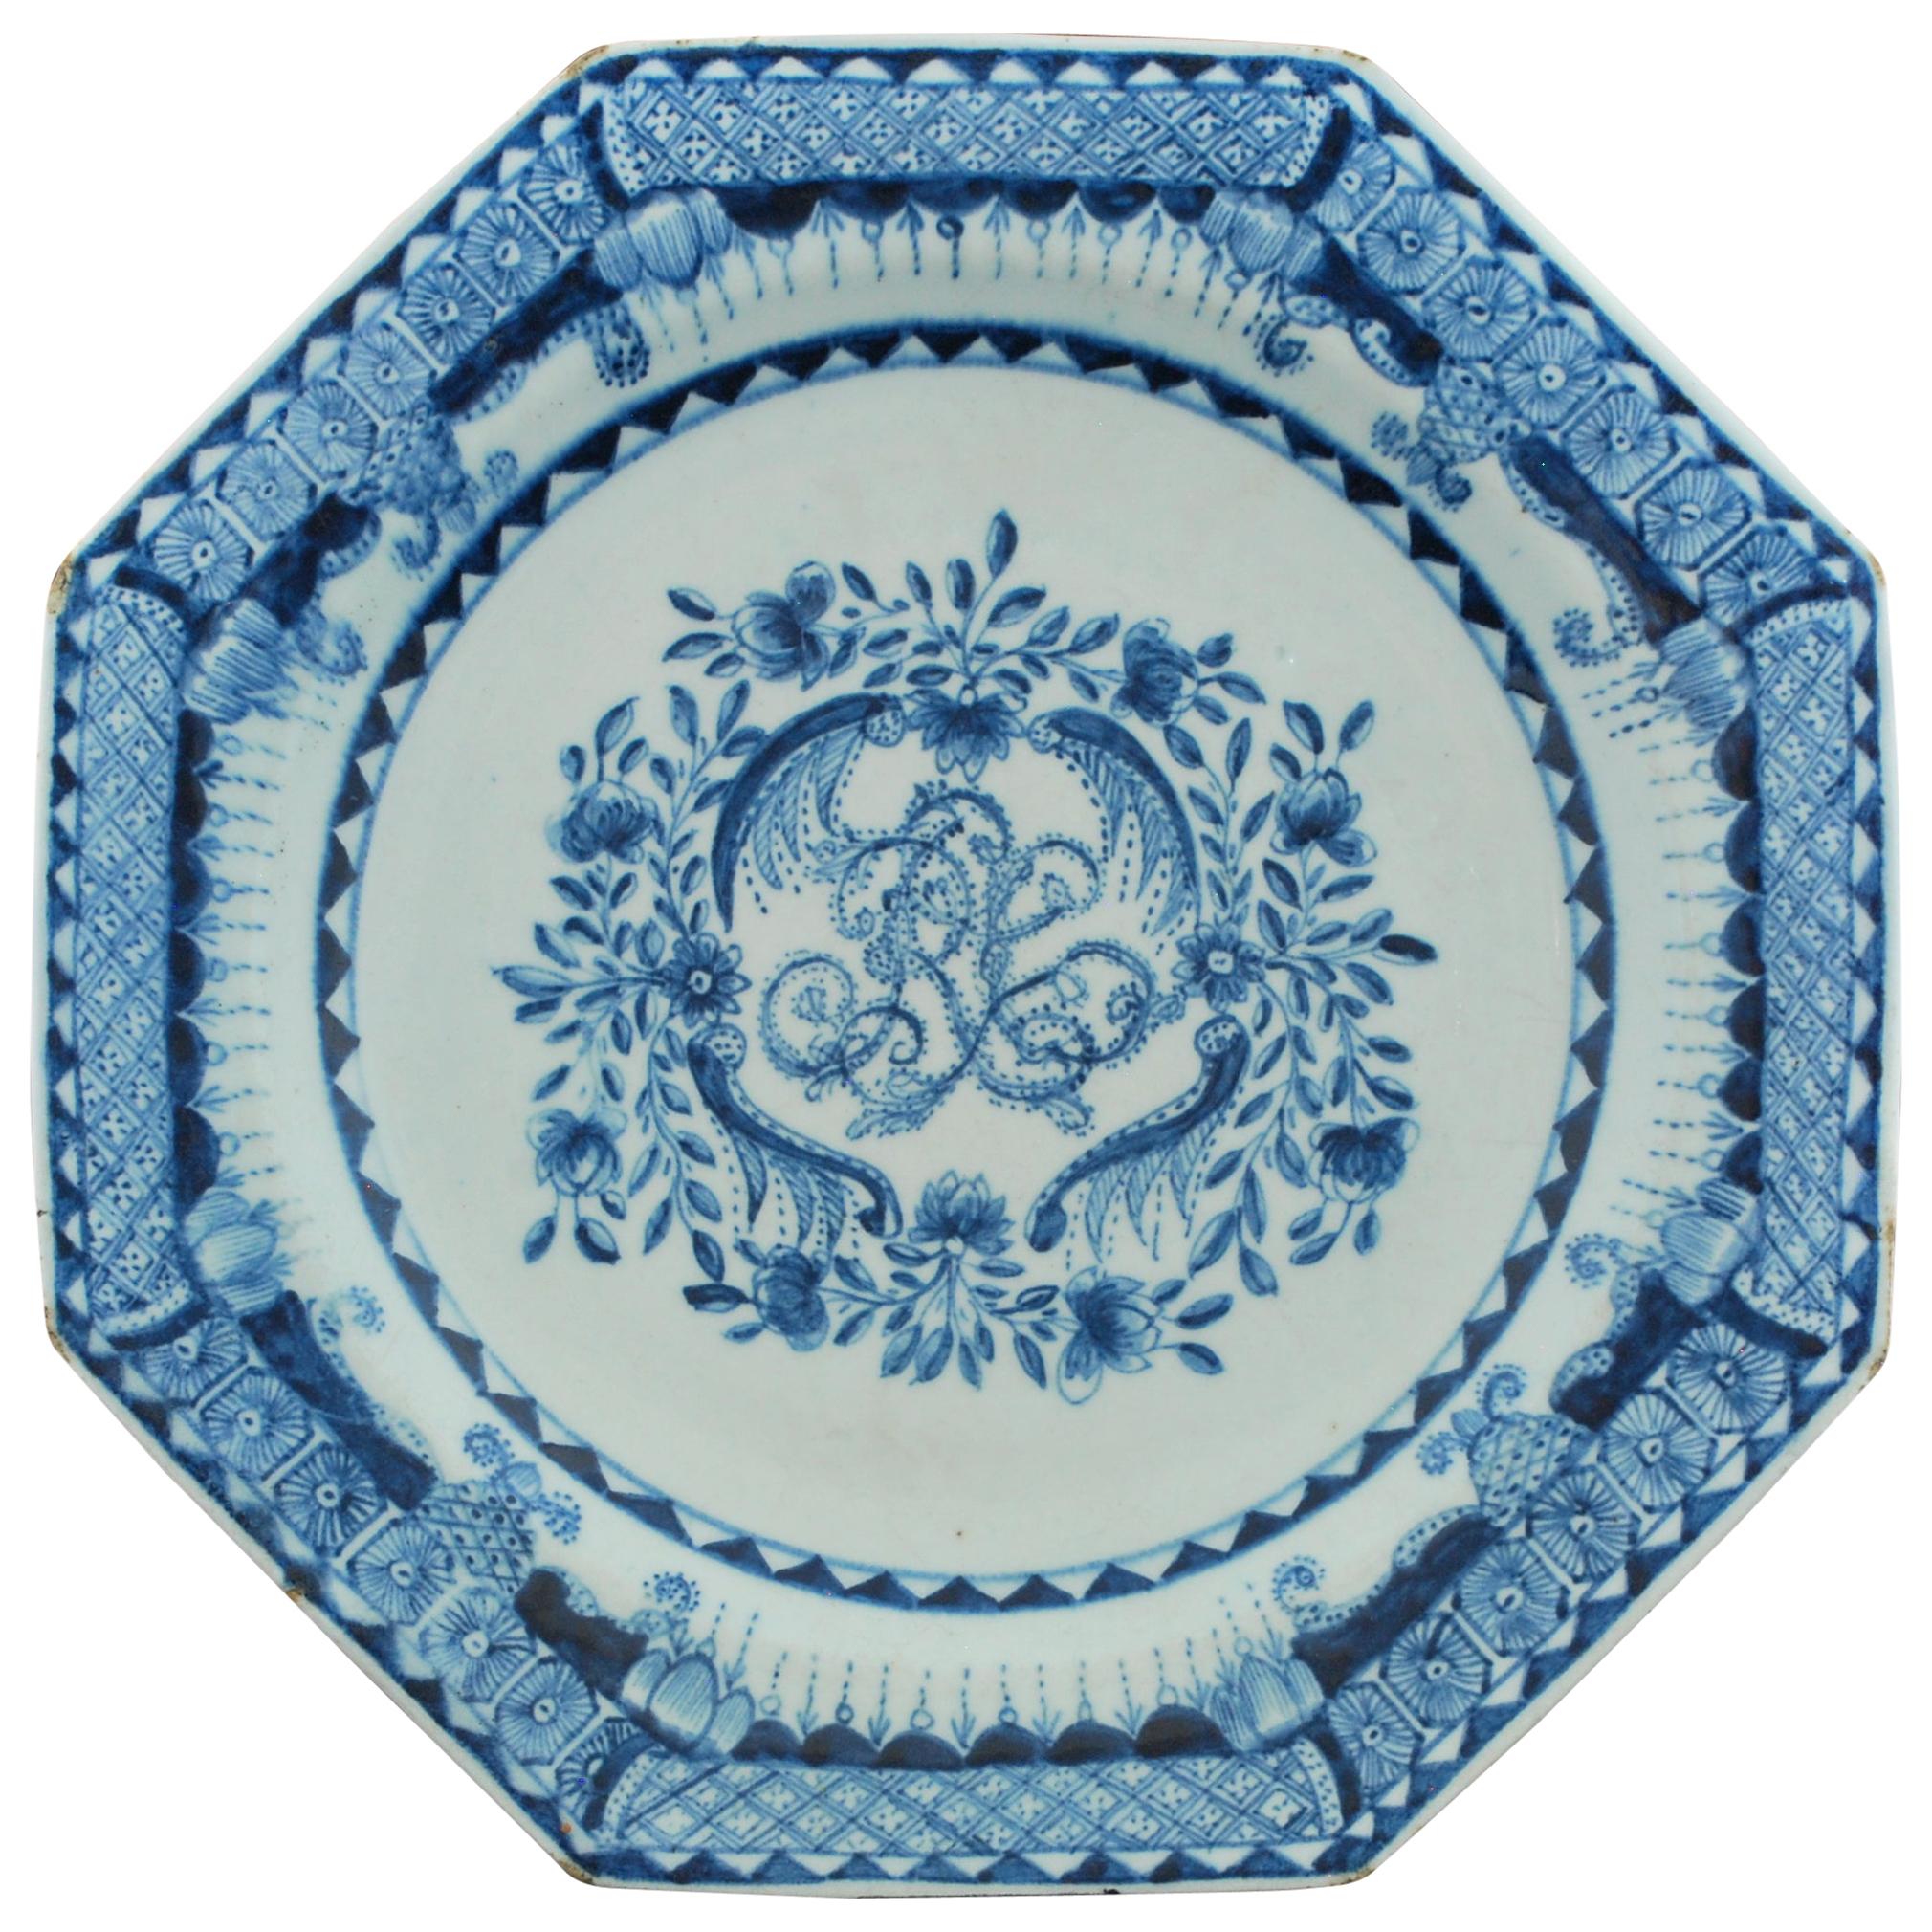 Dated Crowther Plate, Bow Porcelain Factory, 1770